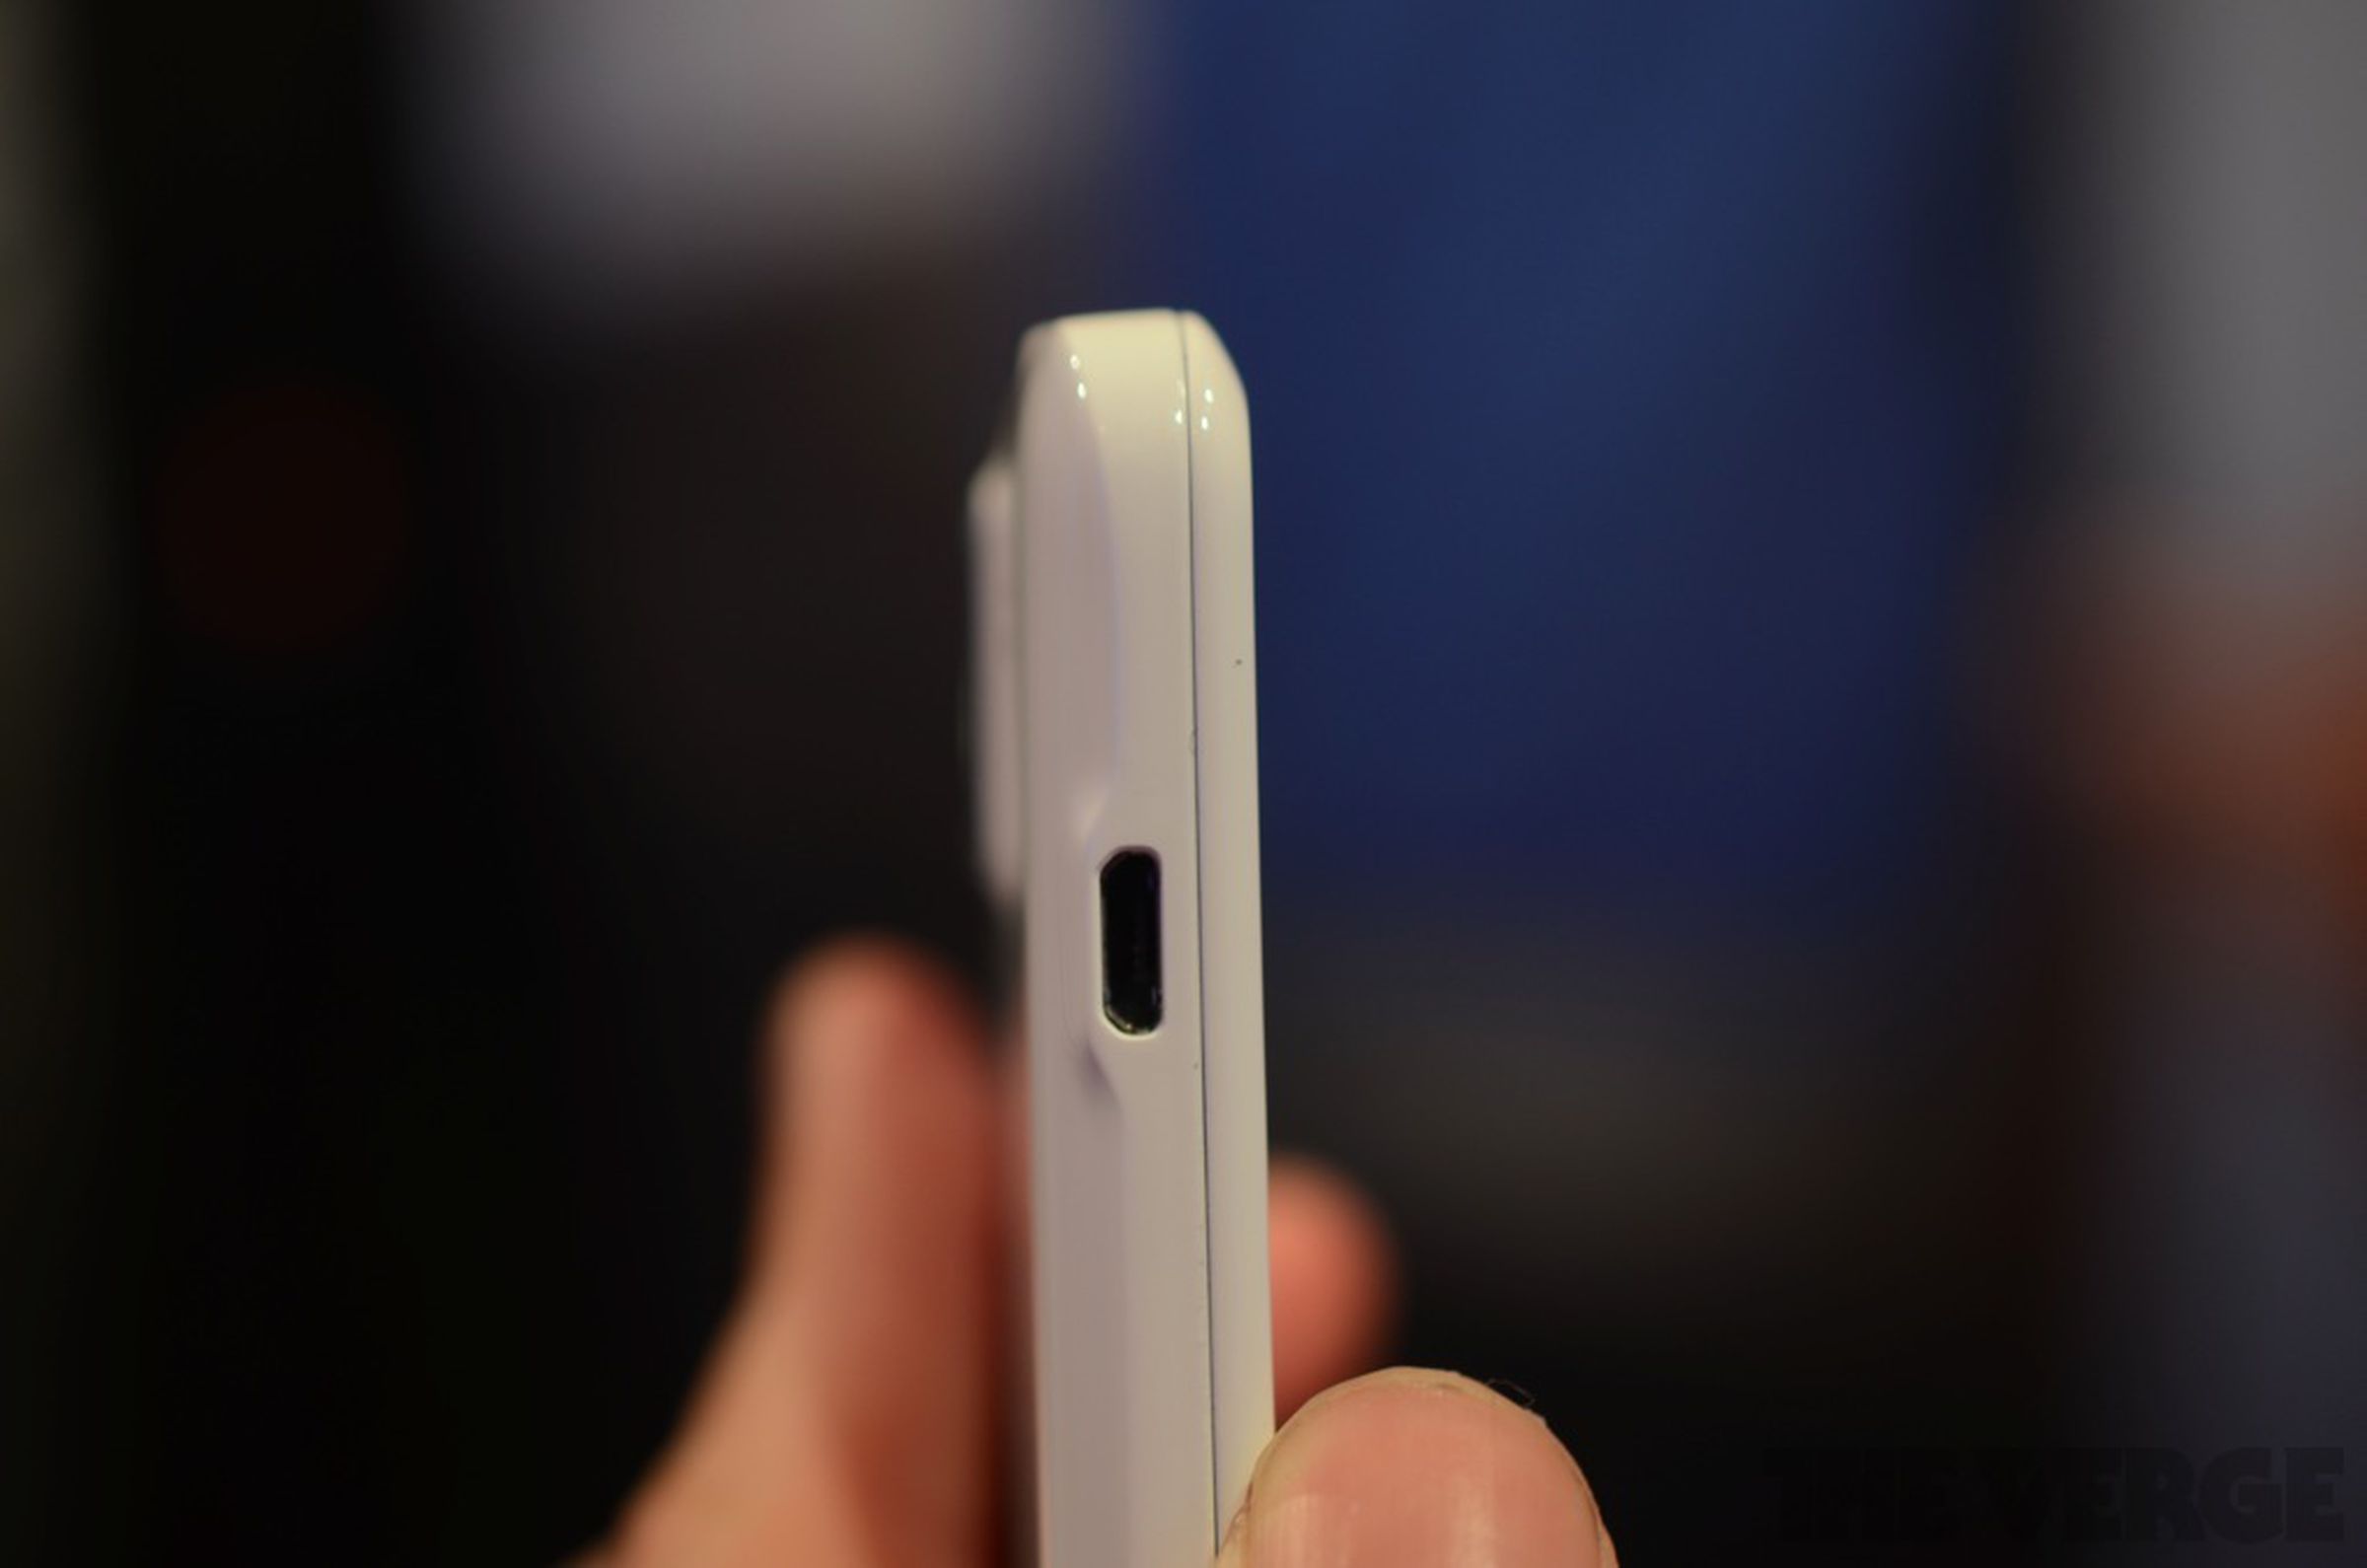 Huawei Ascend D quad hands-on pictures